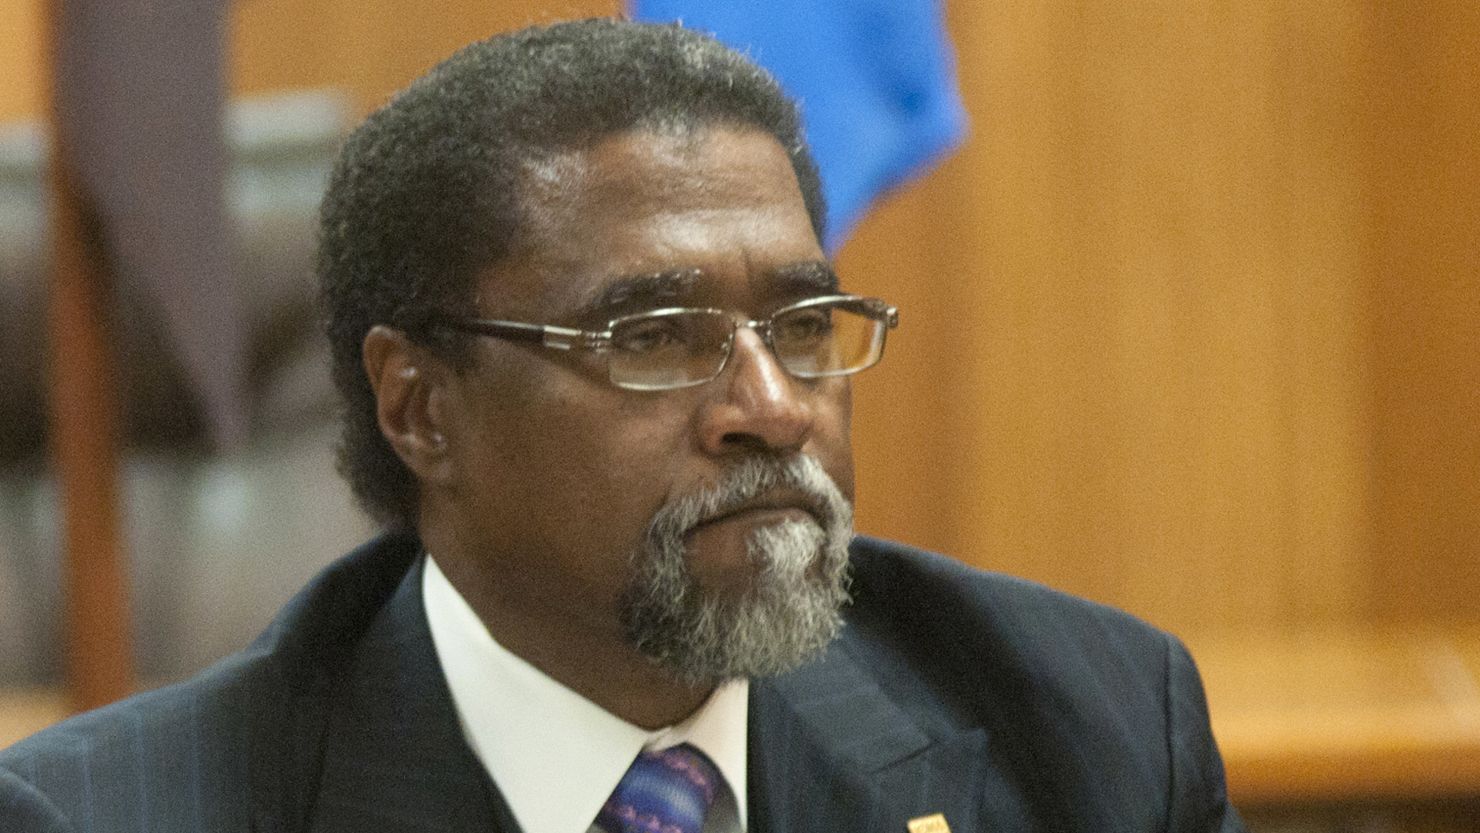 Darnell Earley will resign as emergency manager for Detroit Public Schools amid an uproar of his tenure there as well as his previous tenure as emergency manager overseeing the water supply in Flint, Michigan.